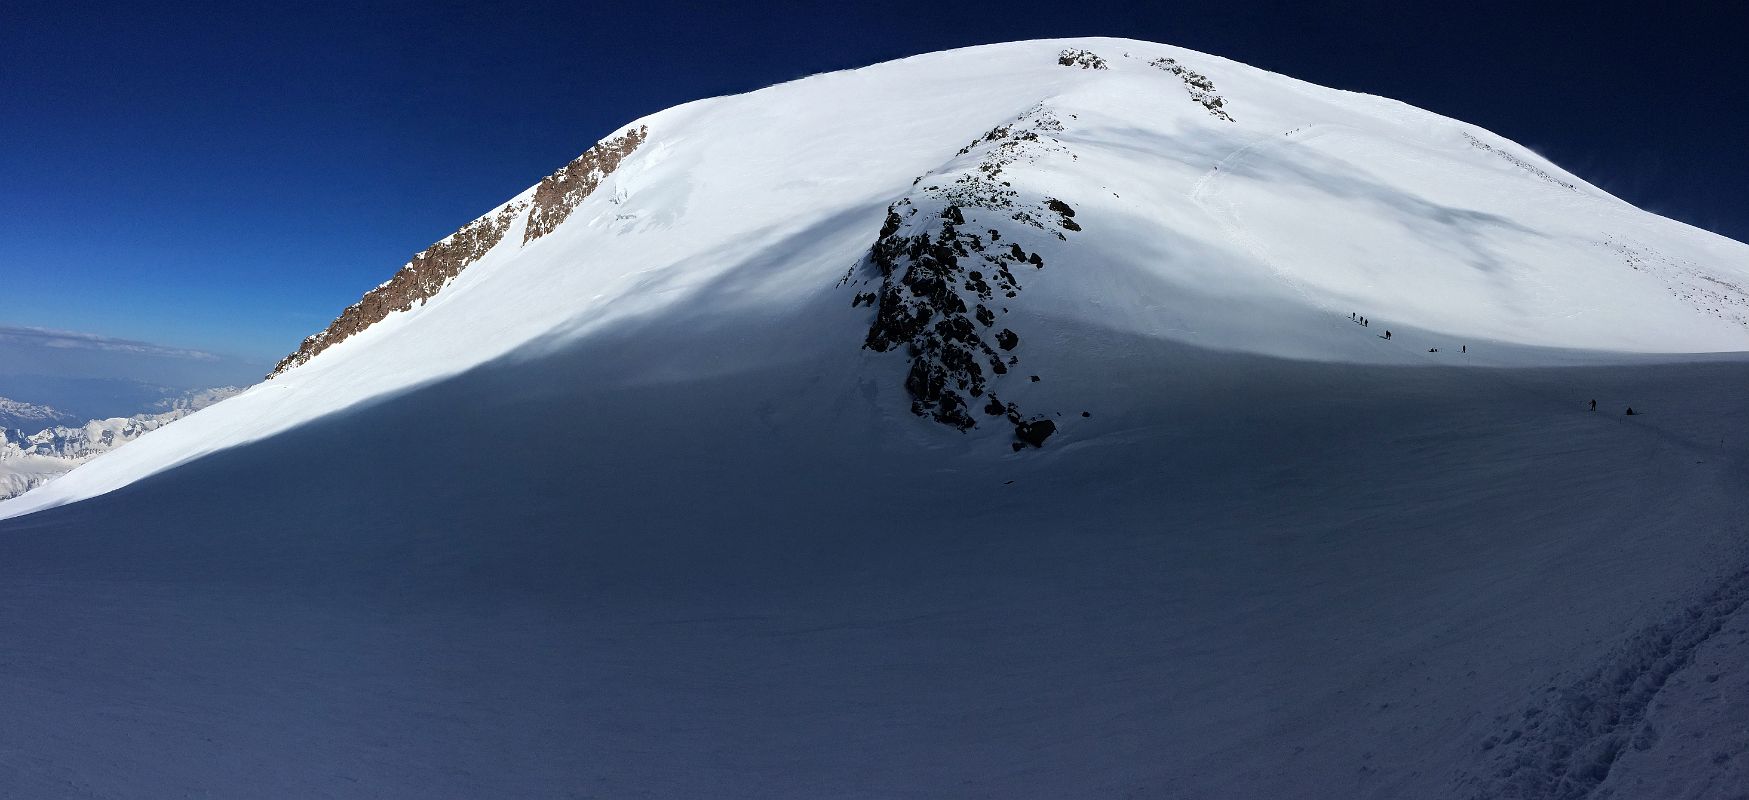 07C Panoramic View Of Mount Elbrus West Summit And Saddle From The End Of The Traverse